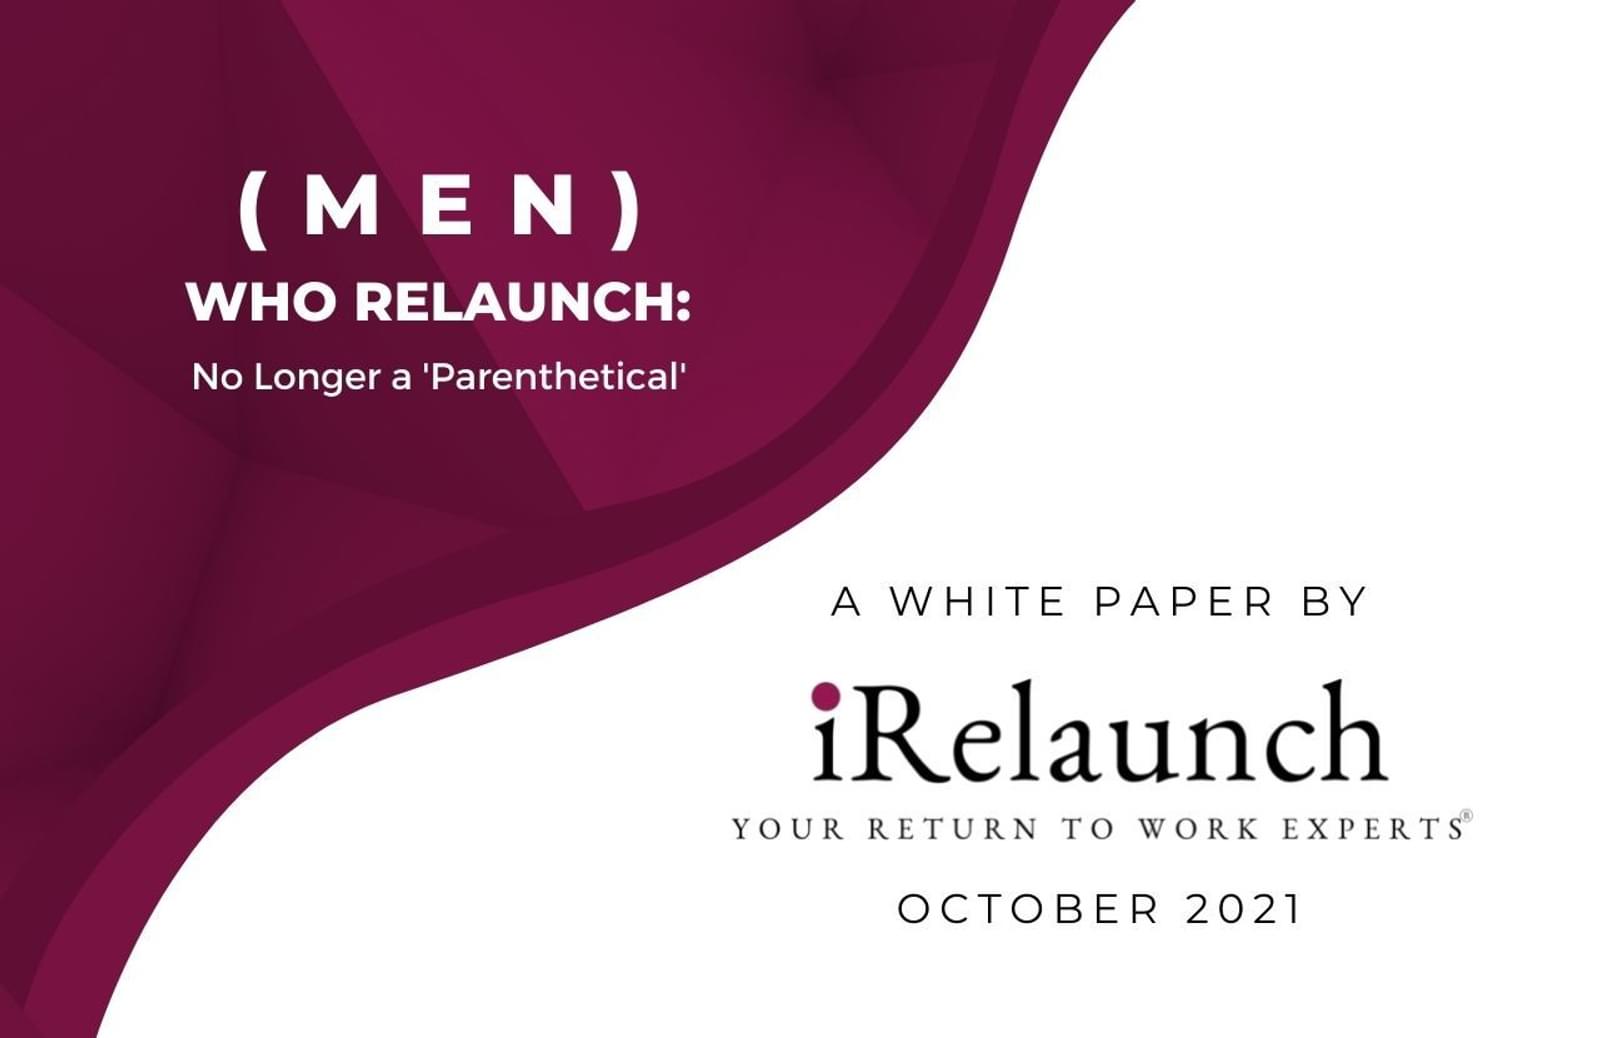 A promotional image for iRelaunch's October 2021 white paper entitled: (Men) Who Relaunch: No Longer a 'Parenthetical'